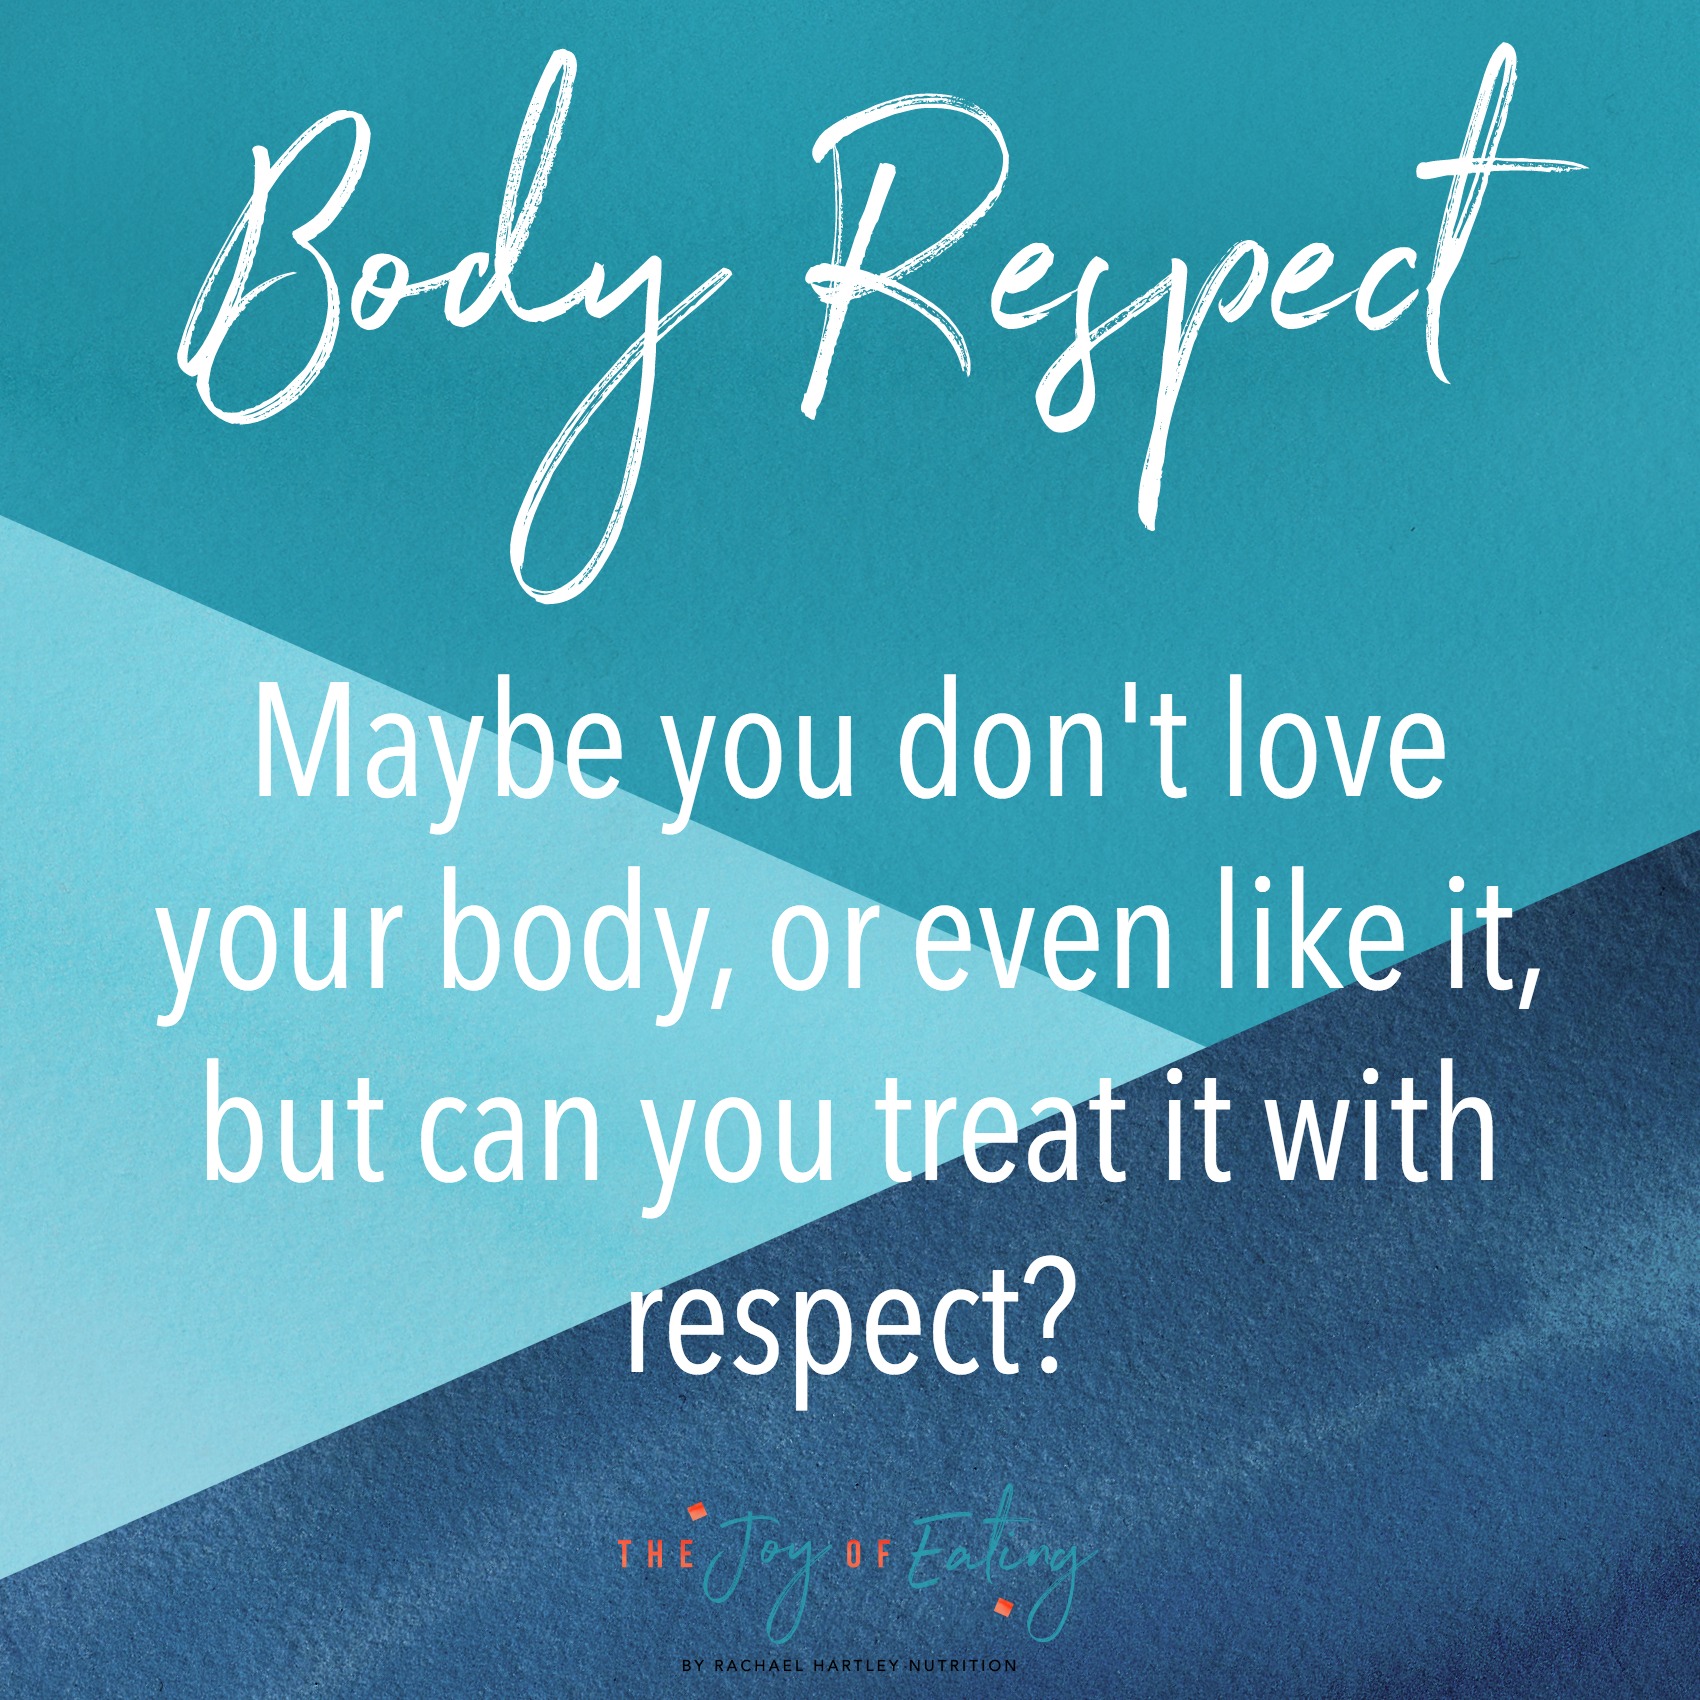 What If I Can't Love My Body? Exploring Body Respect, Acceptance, Trust ...